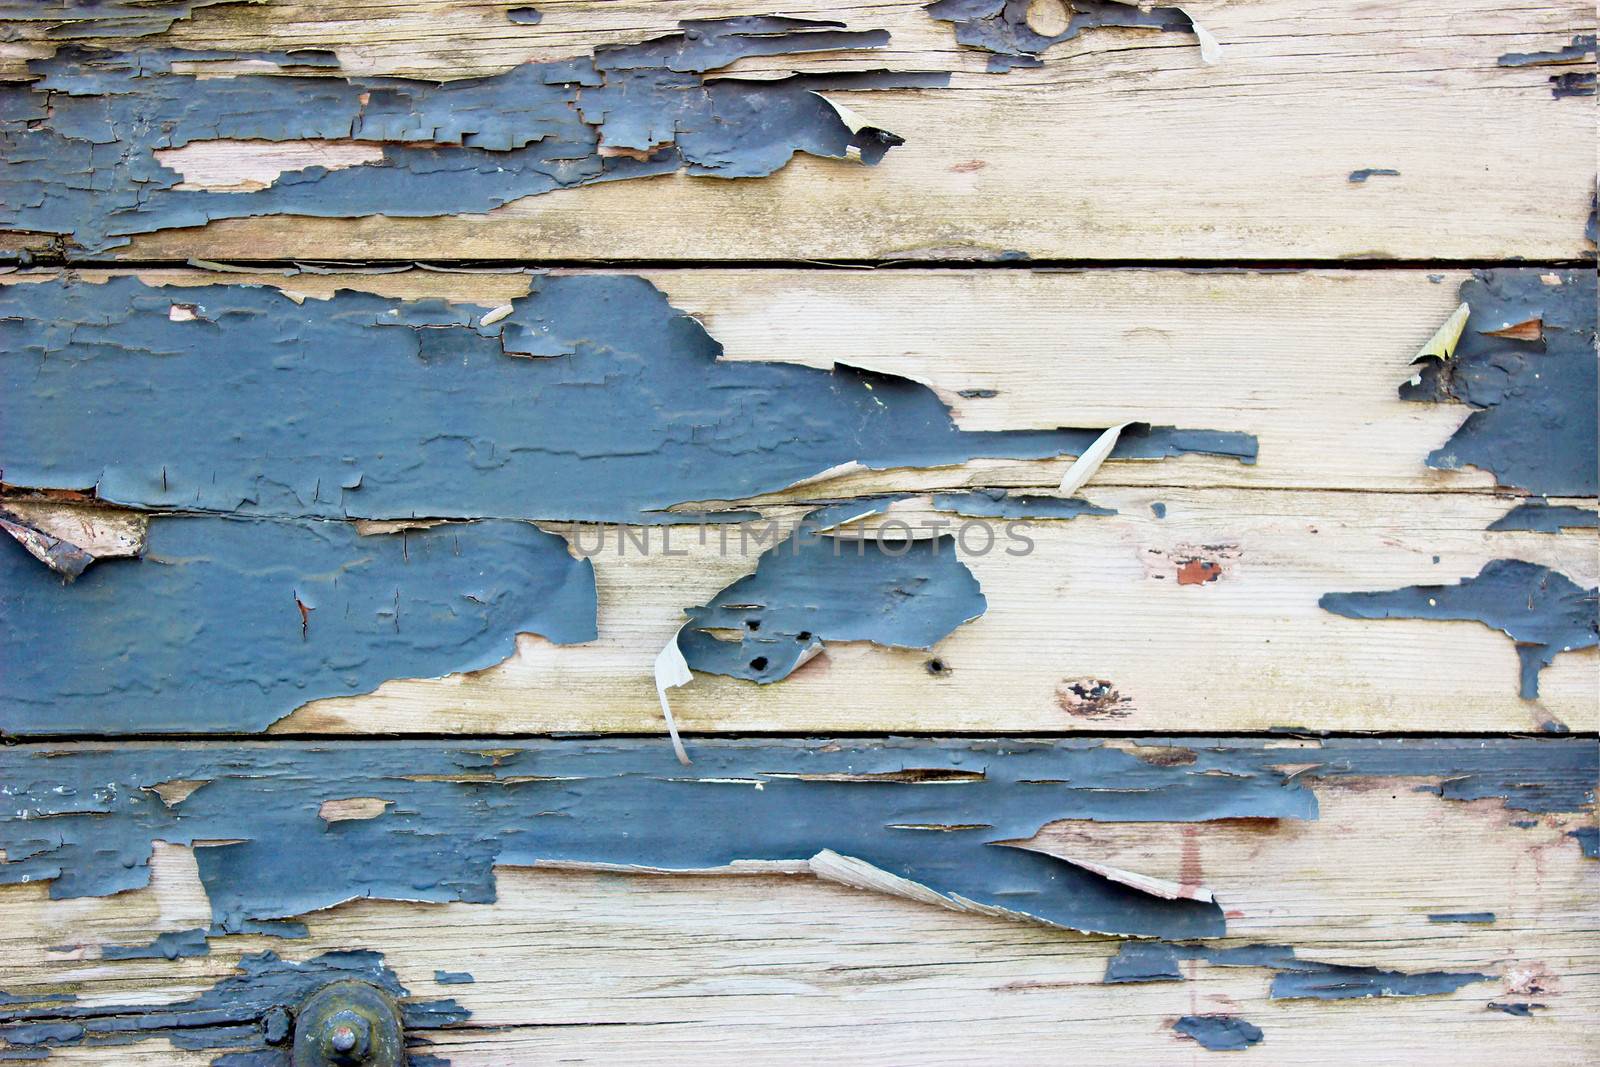 A Grunge Background with Old Wooden Boards and Peeling Paint